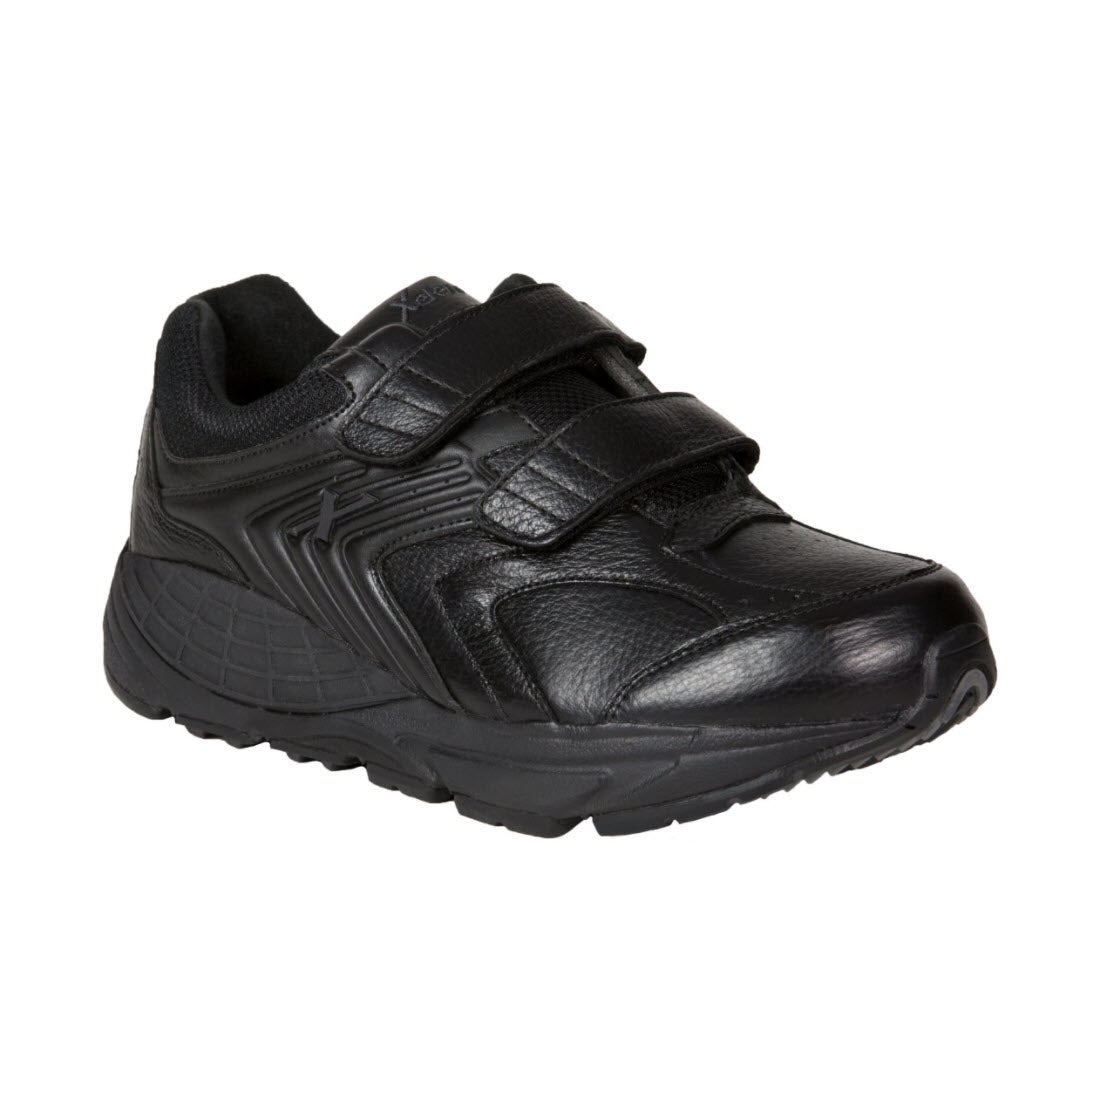 A black Xelero Matrix Strap athletic shoe with Velcro straps and a textured design, featuring a prominent star logo on the side.